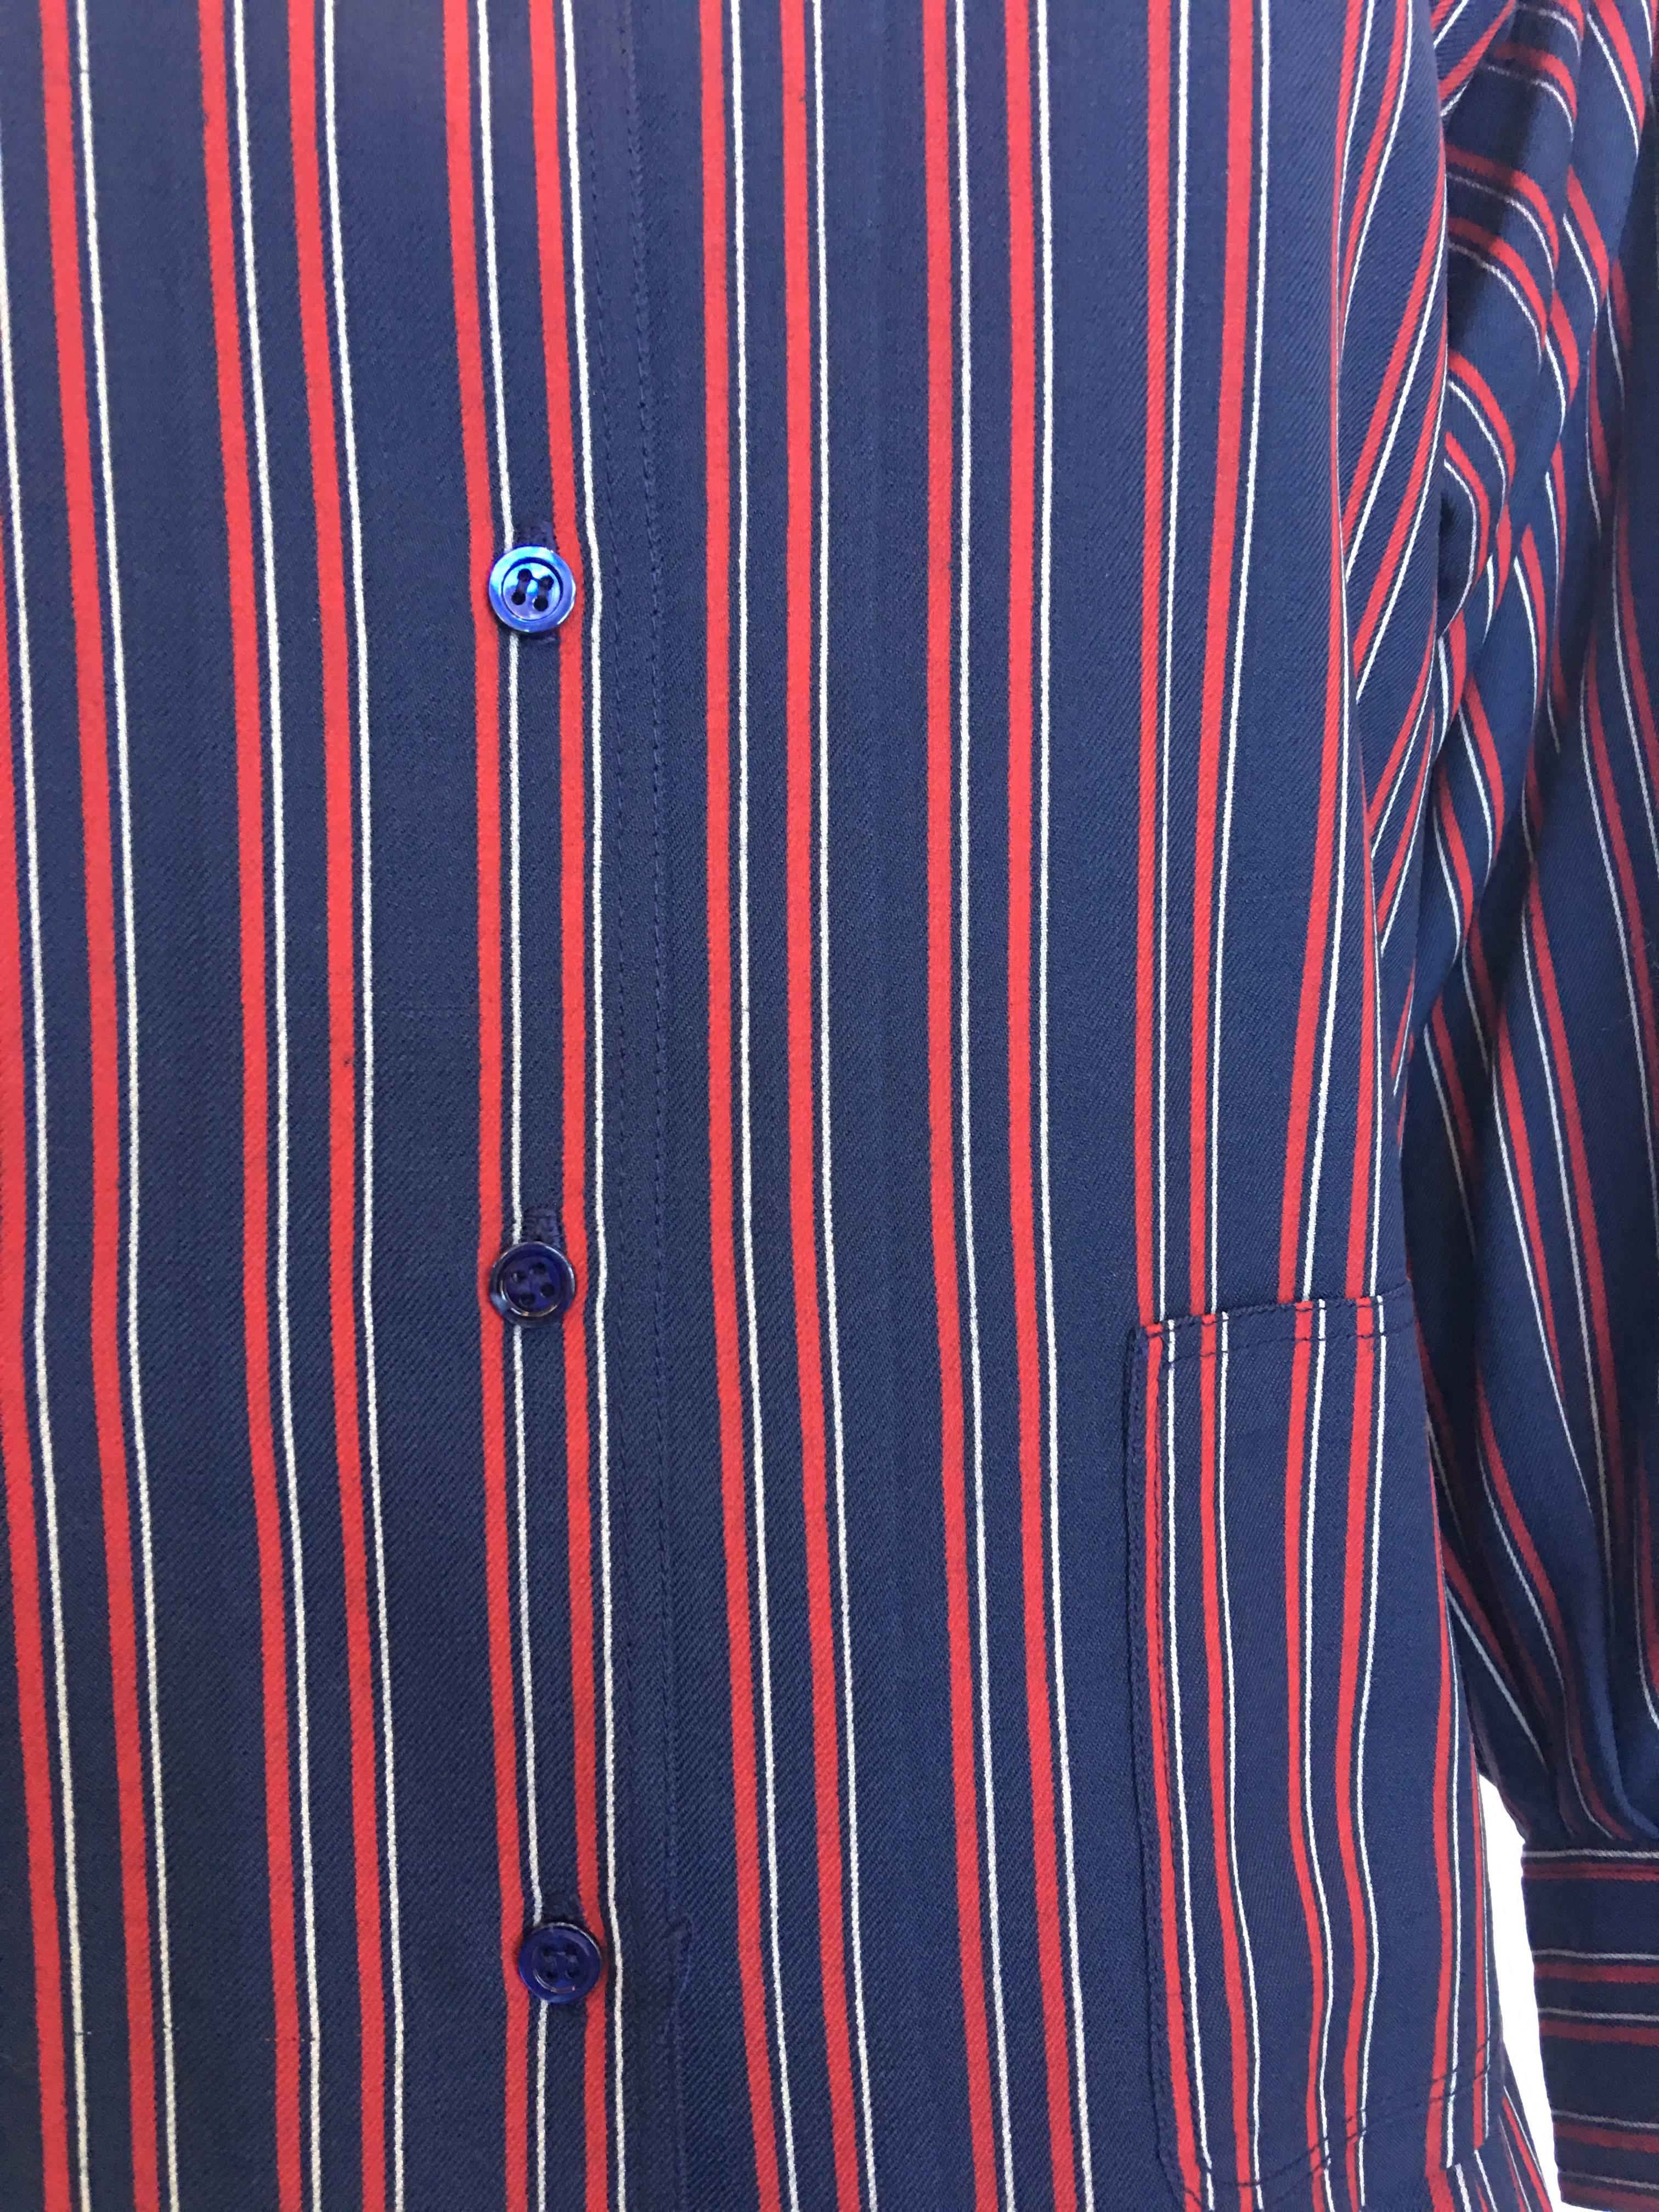 1970s Saint Laurent Blue & Red Striped Wool 2 piece Skirt Set

Made in France
Size Label - 34

All measurements (taken flat):
Shirt:
Shoulders - seam to seam: 16